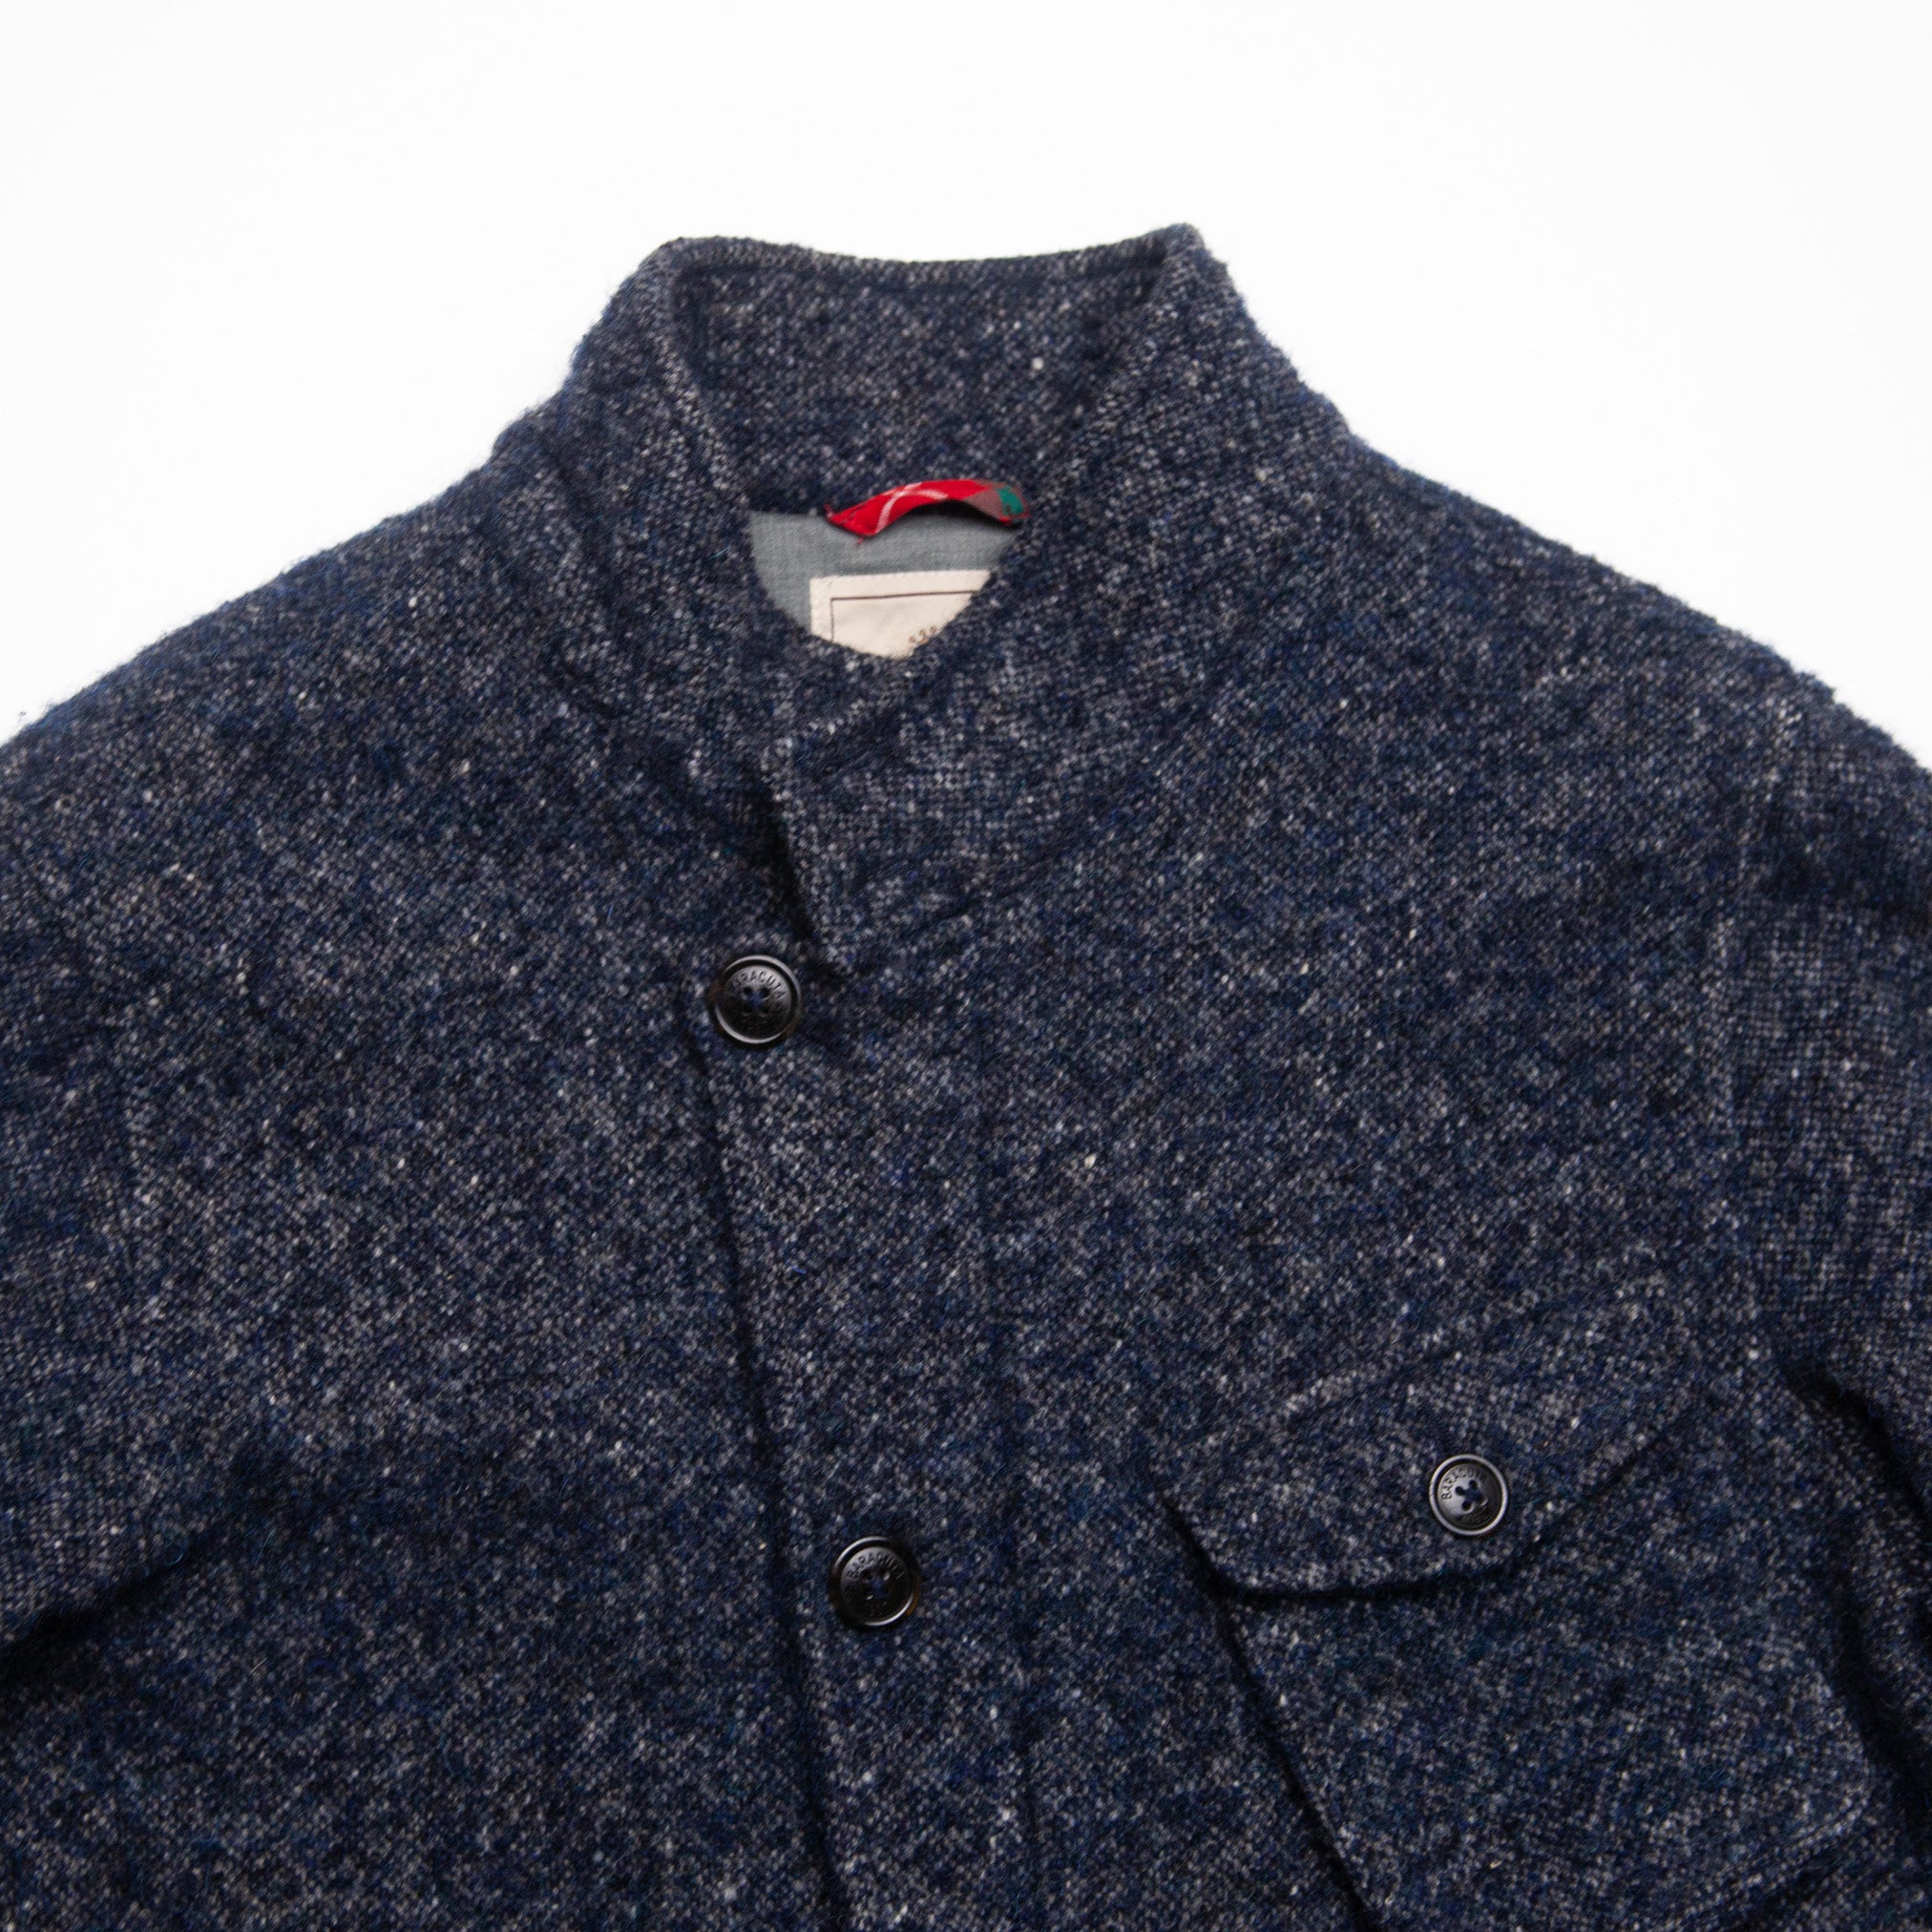 Navy Donegal Curly Tweed Jacket - XL